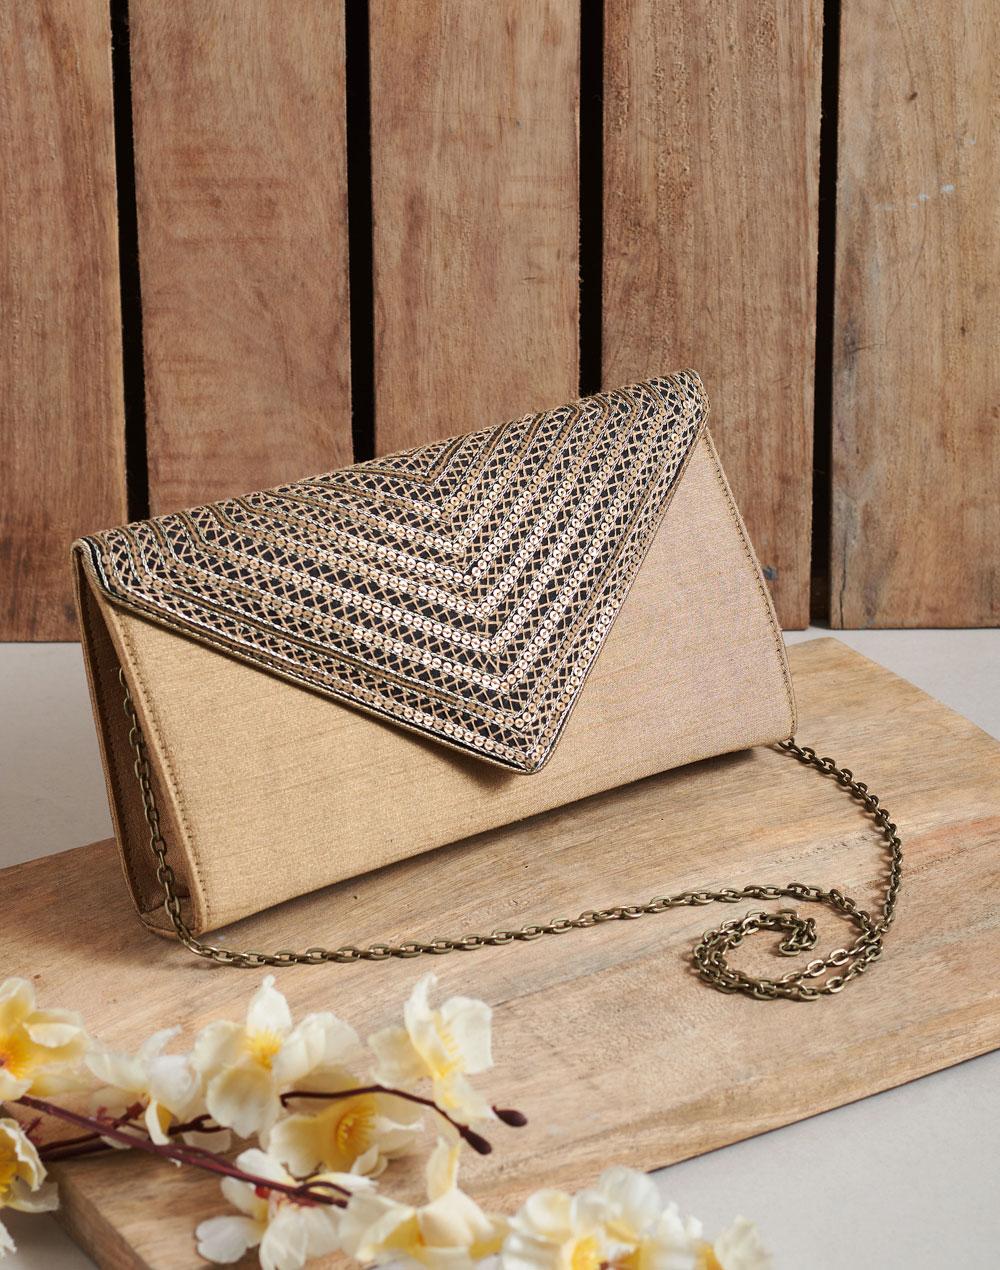 gold fabric sequence embroidered clutch